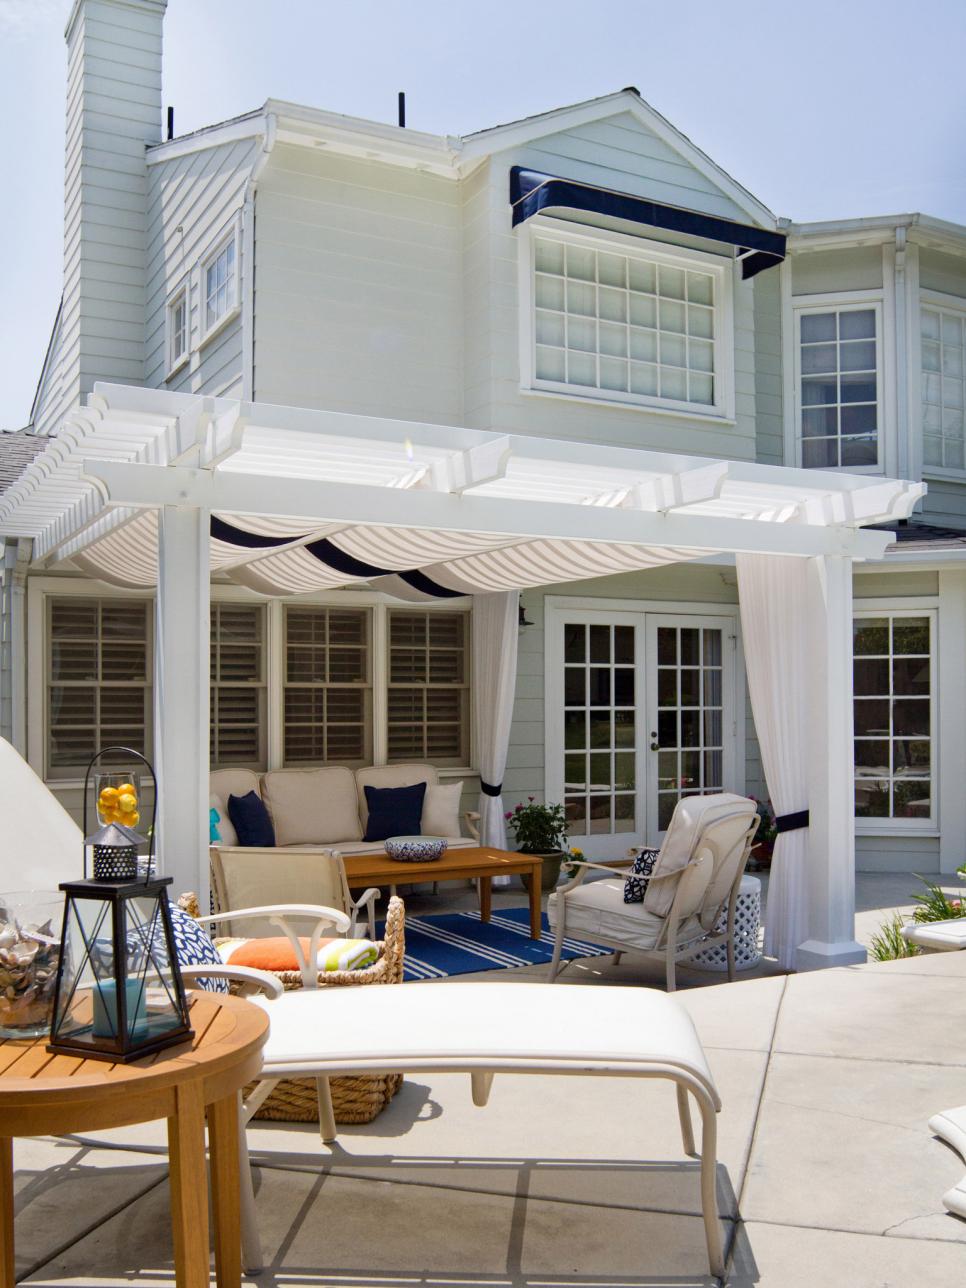 Hamptons-Inspired Outdoor Living Space With Poolside Seating and Shaded Area